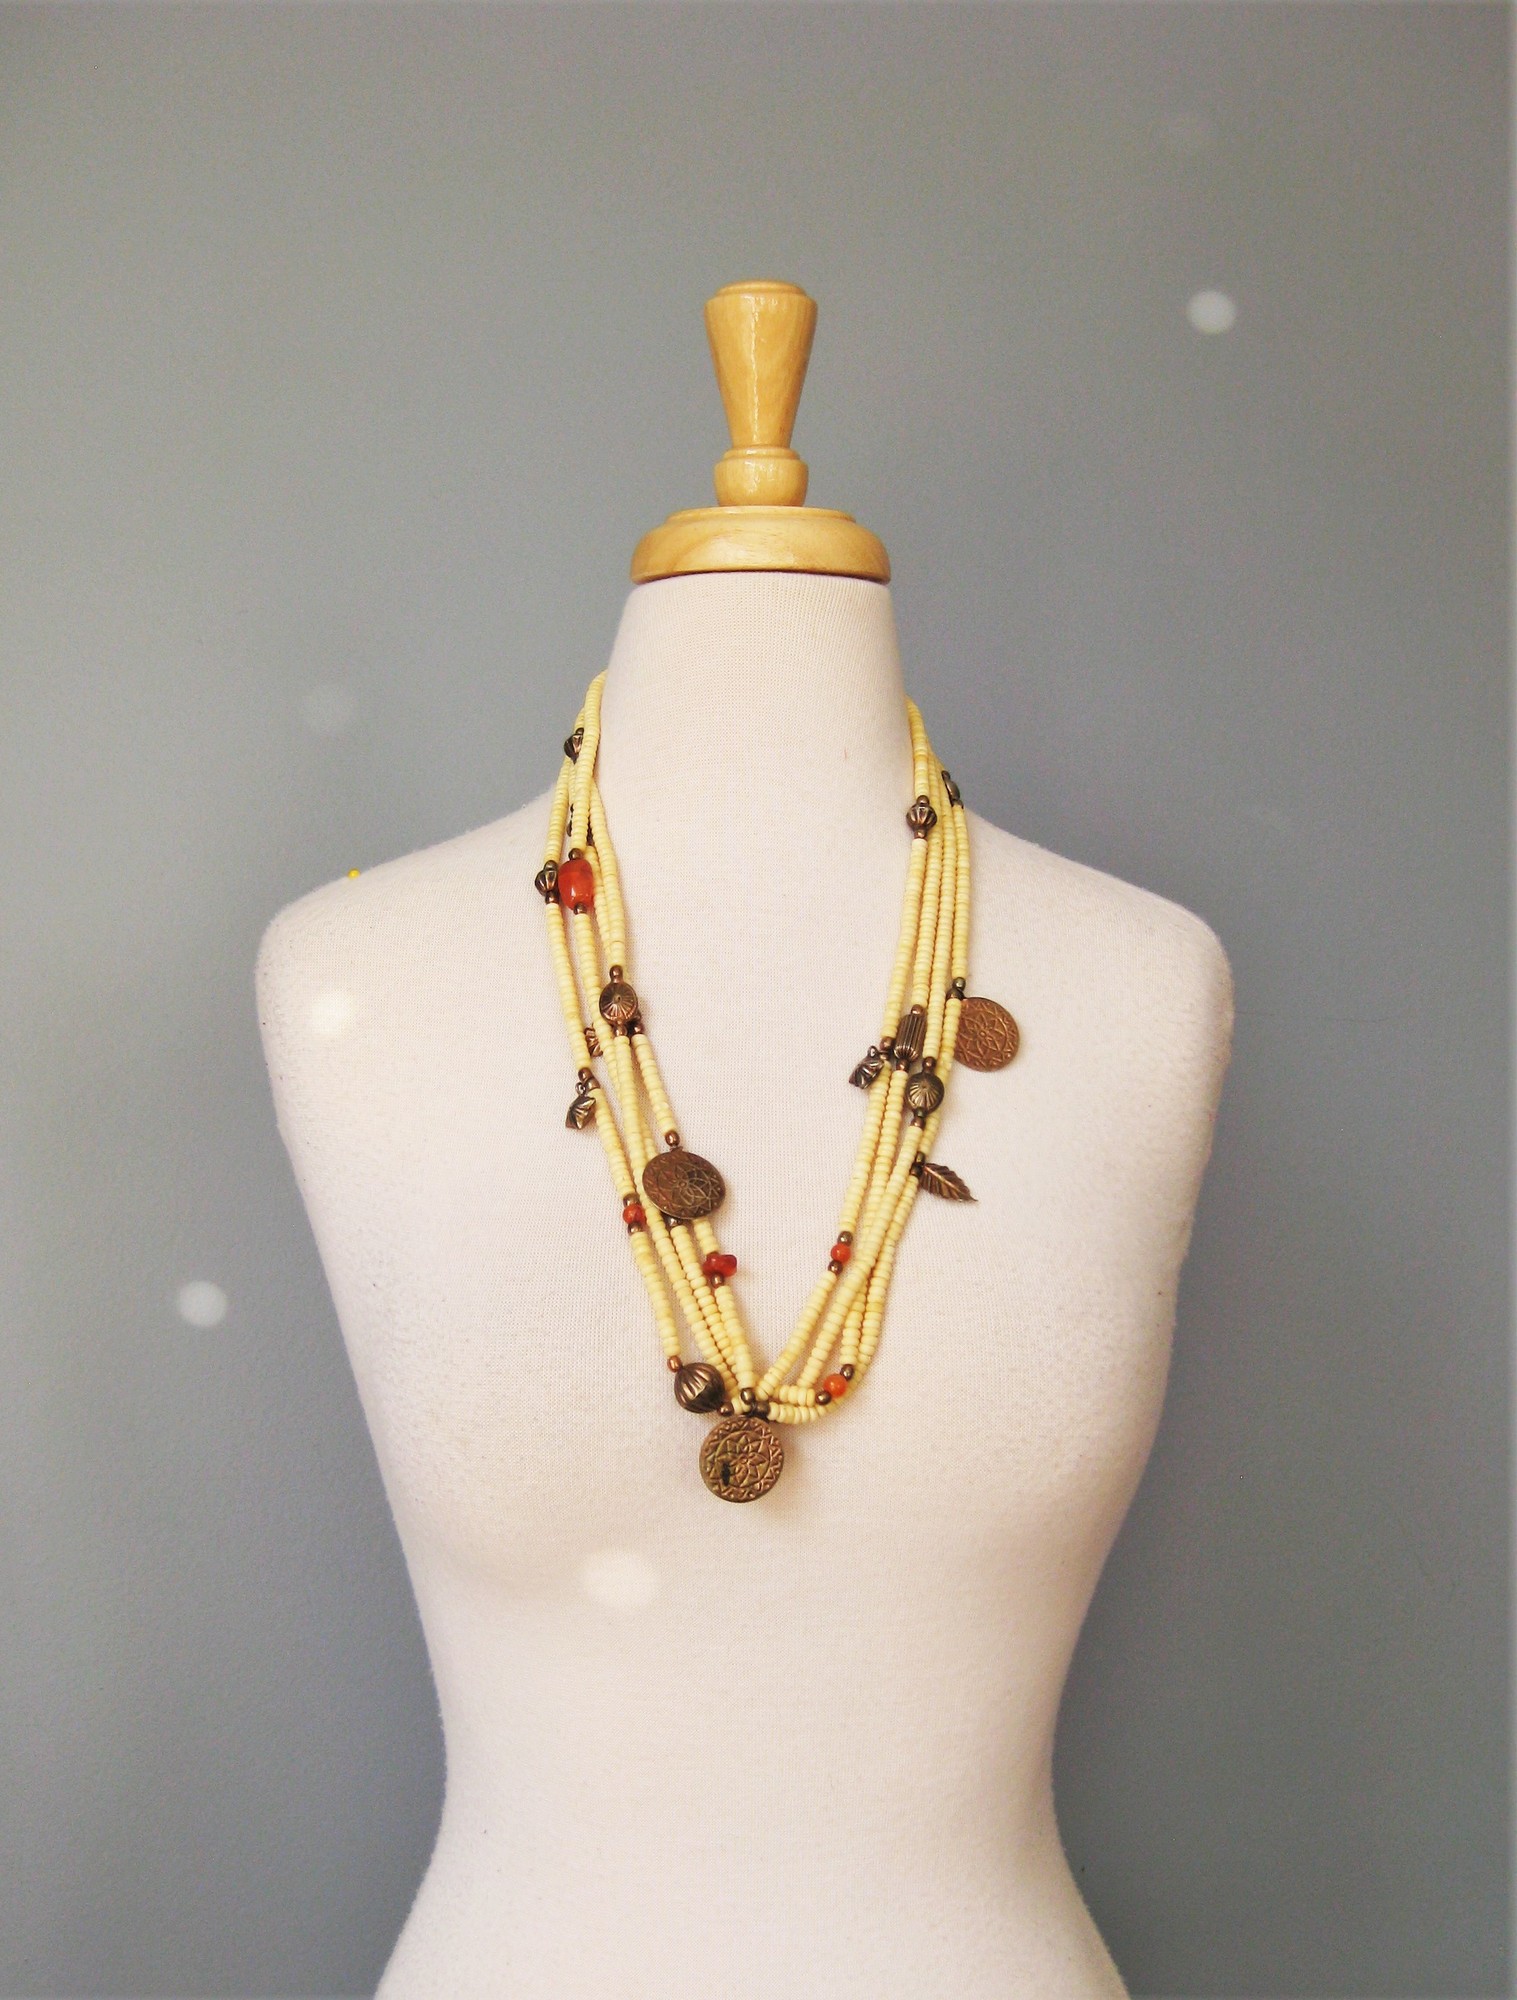 Wood And Brass, Ivory, Size: None
Tribal style necklace made from multiple strands of ivory and orange beads, metal coins and charms

Wear as shown or twist it into a choker length torsade.\\


28.75in long
closes with a silver toned hook

thanks for looking!
#40106